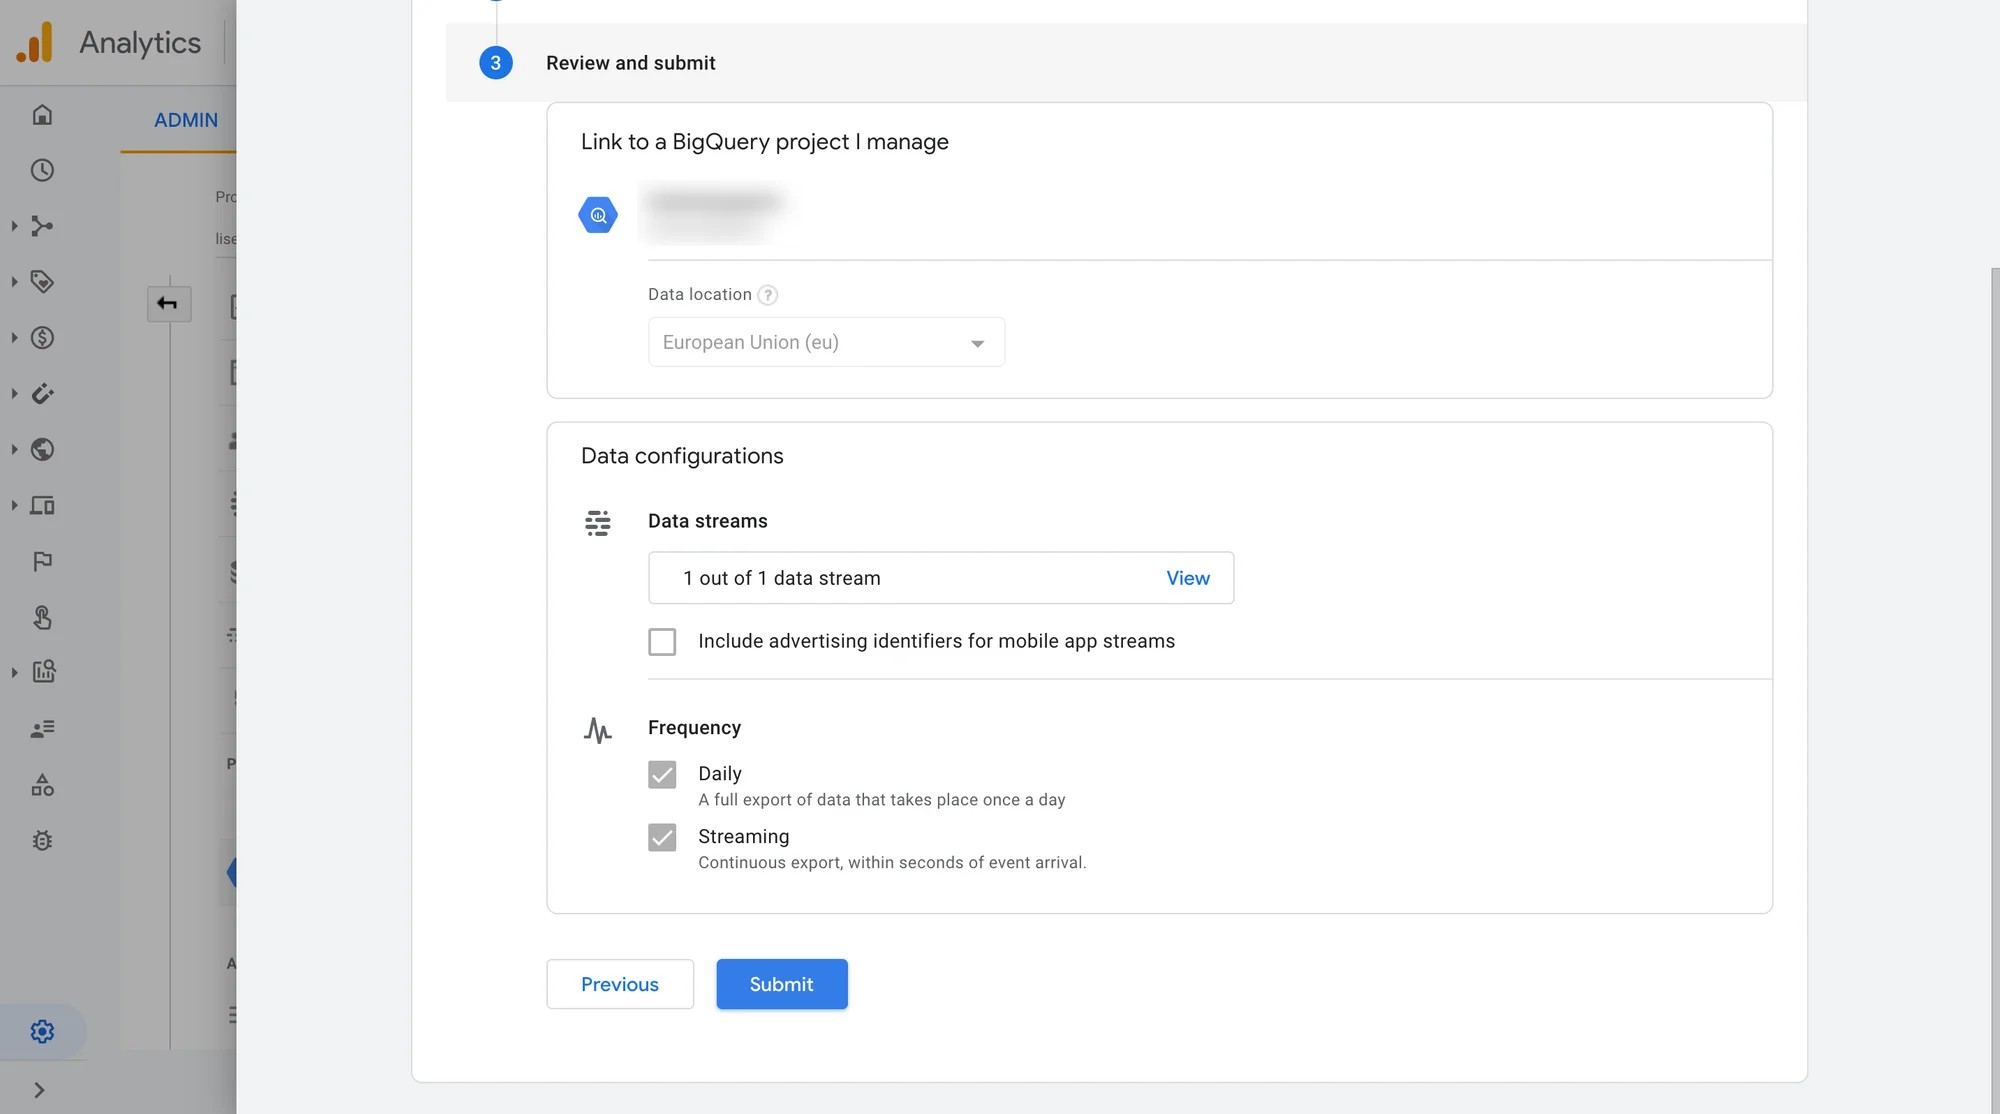 Submit the link to BigQuery